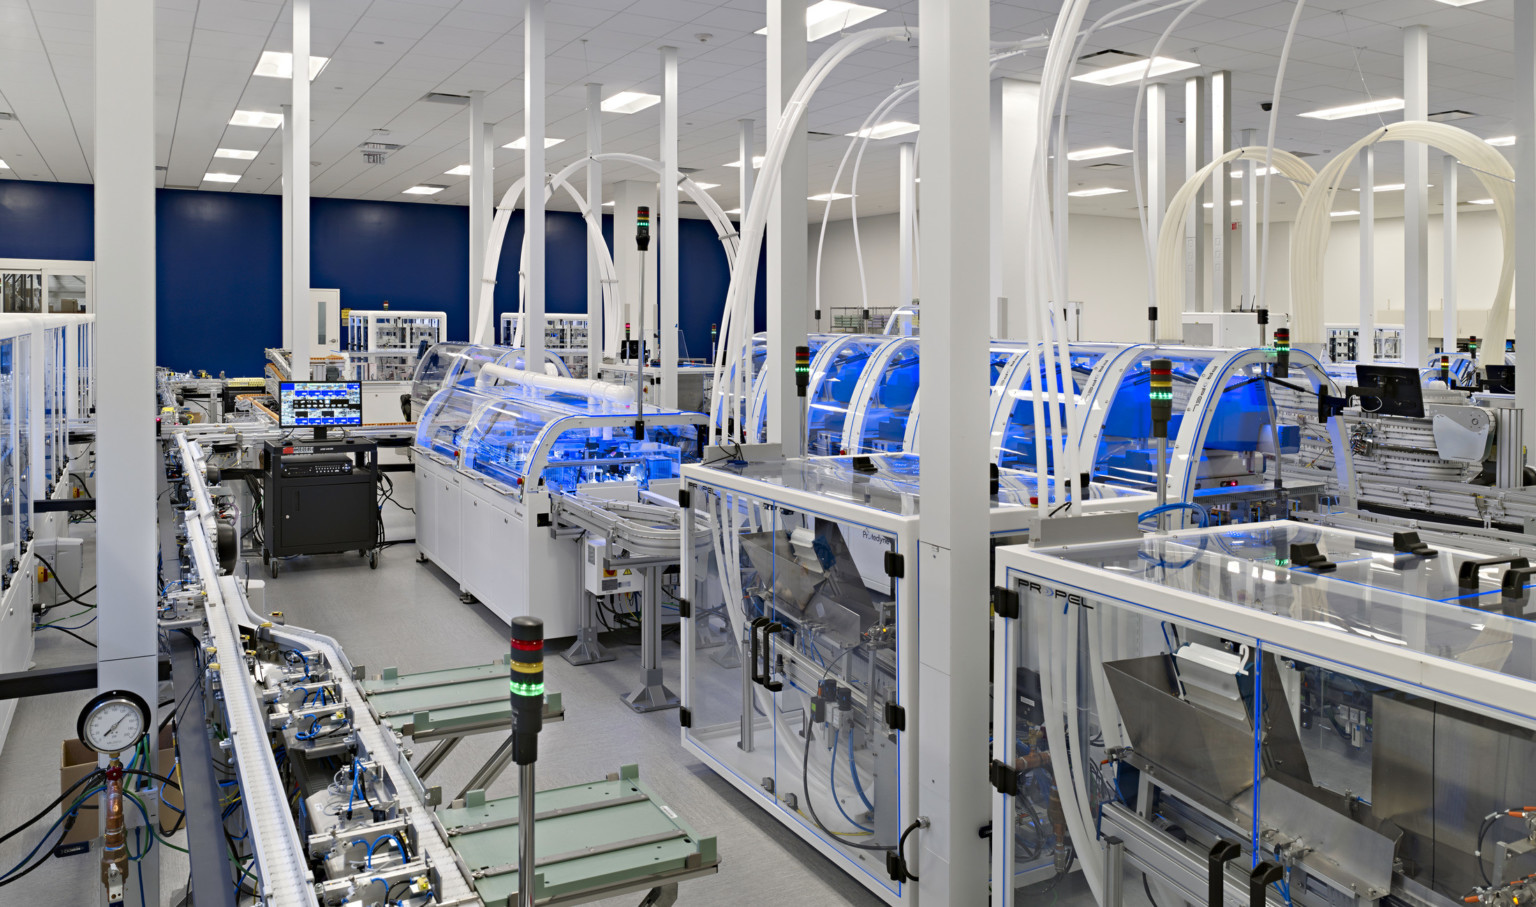 lab environment with rows of clear glass electronic manufacturing cubes with plastic tube systems connecting to the ceiling